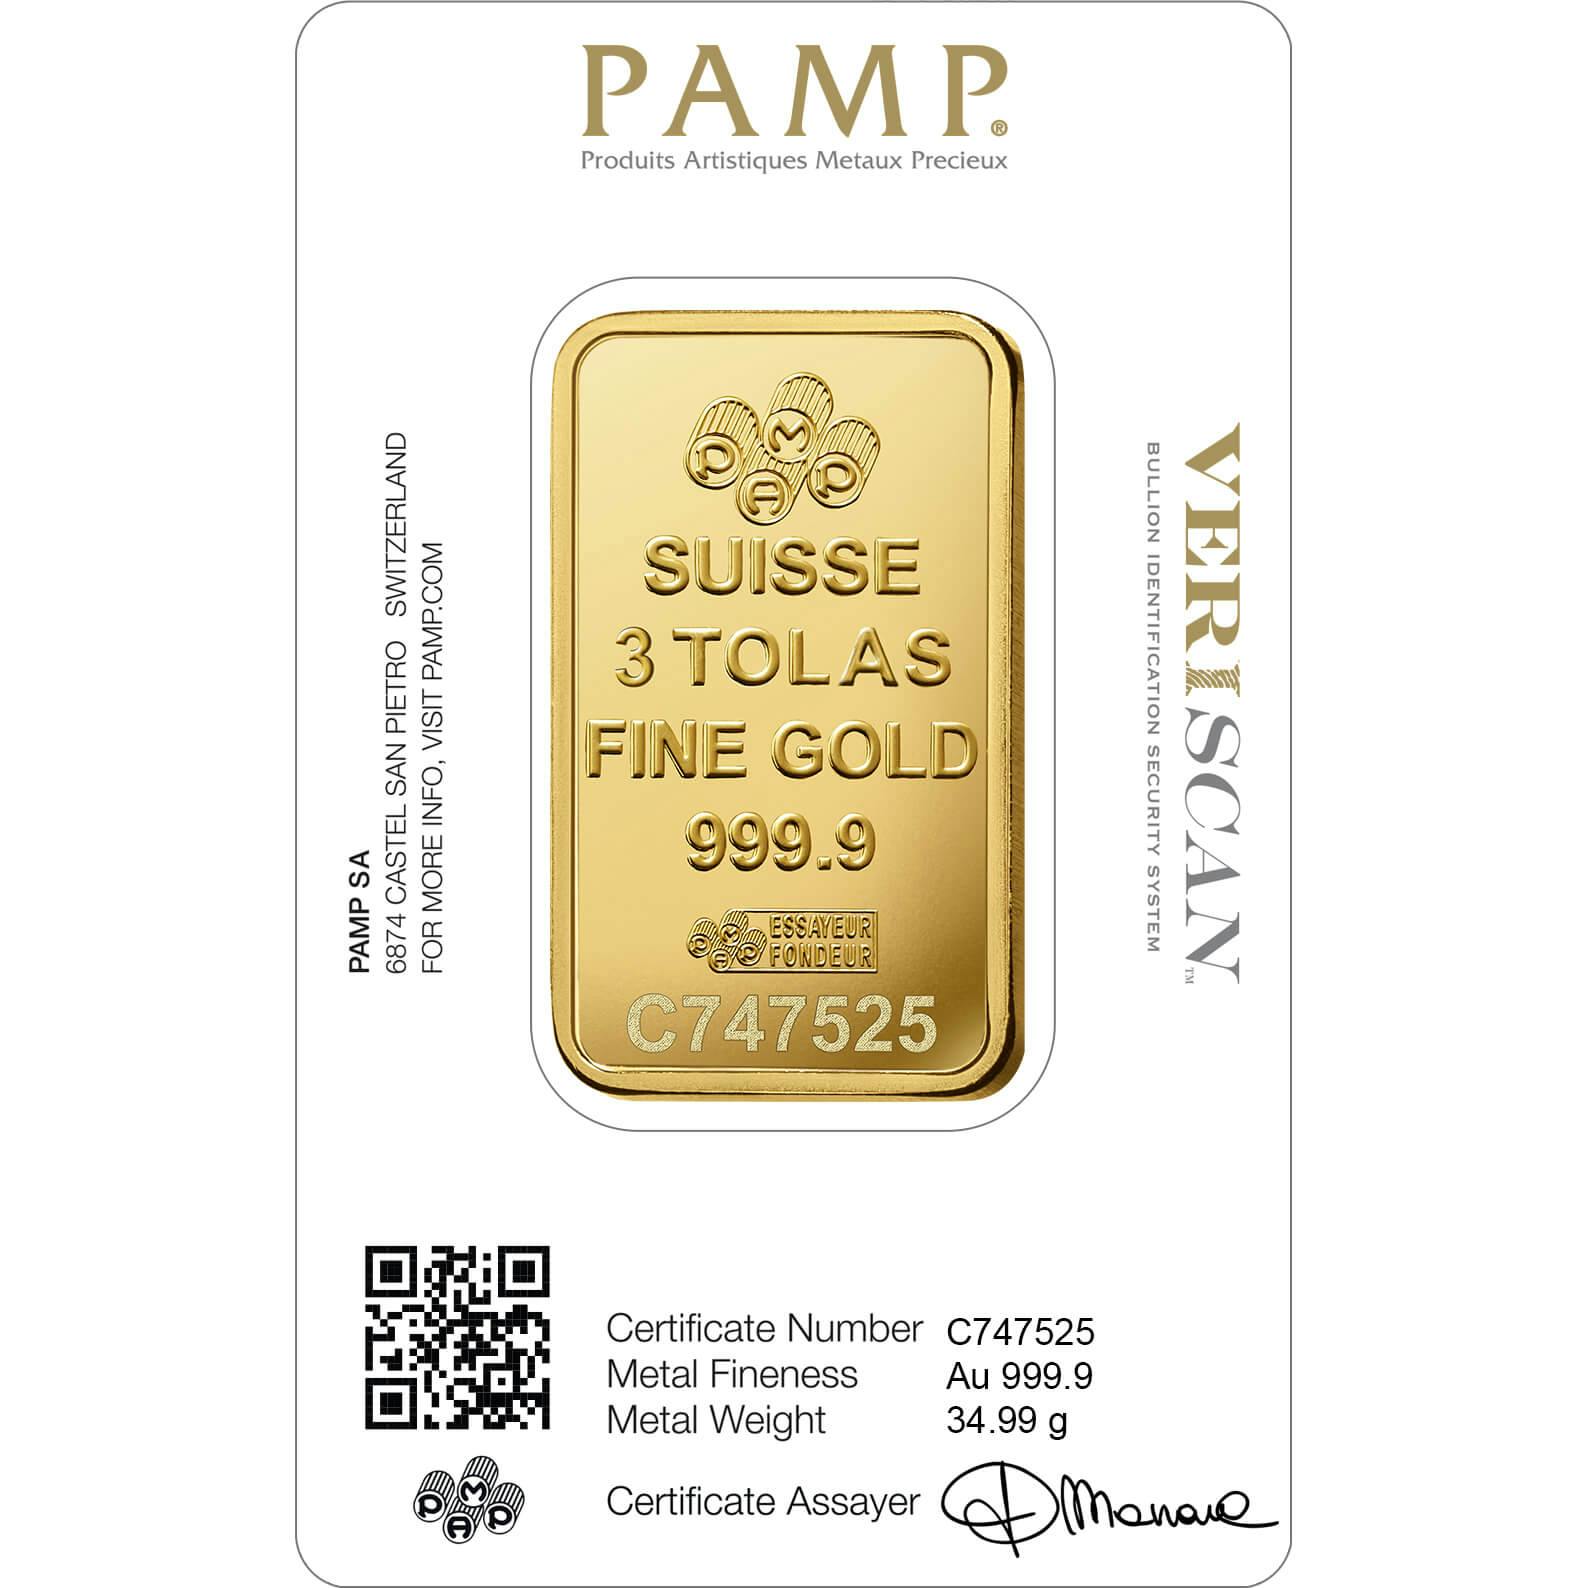 Invest in 3 tolas Fine Gold Lady Fortuna - PAMP Swiss - Back Veriscan